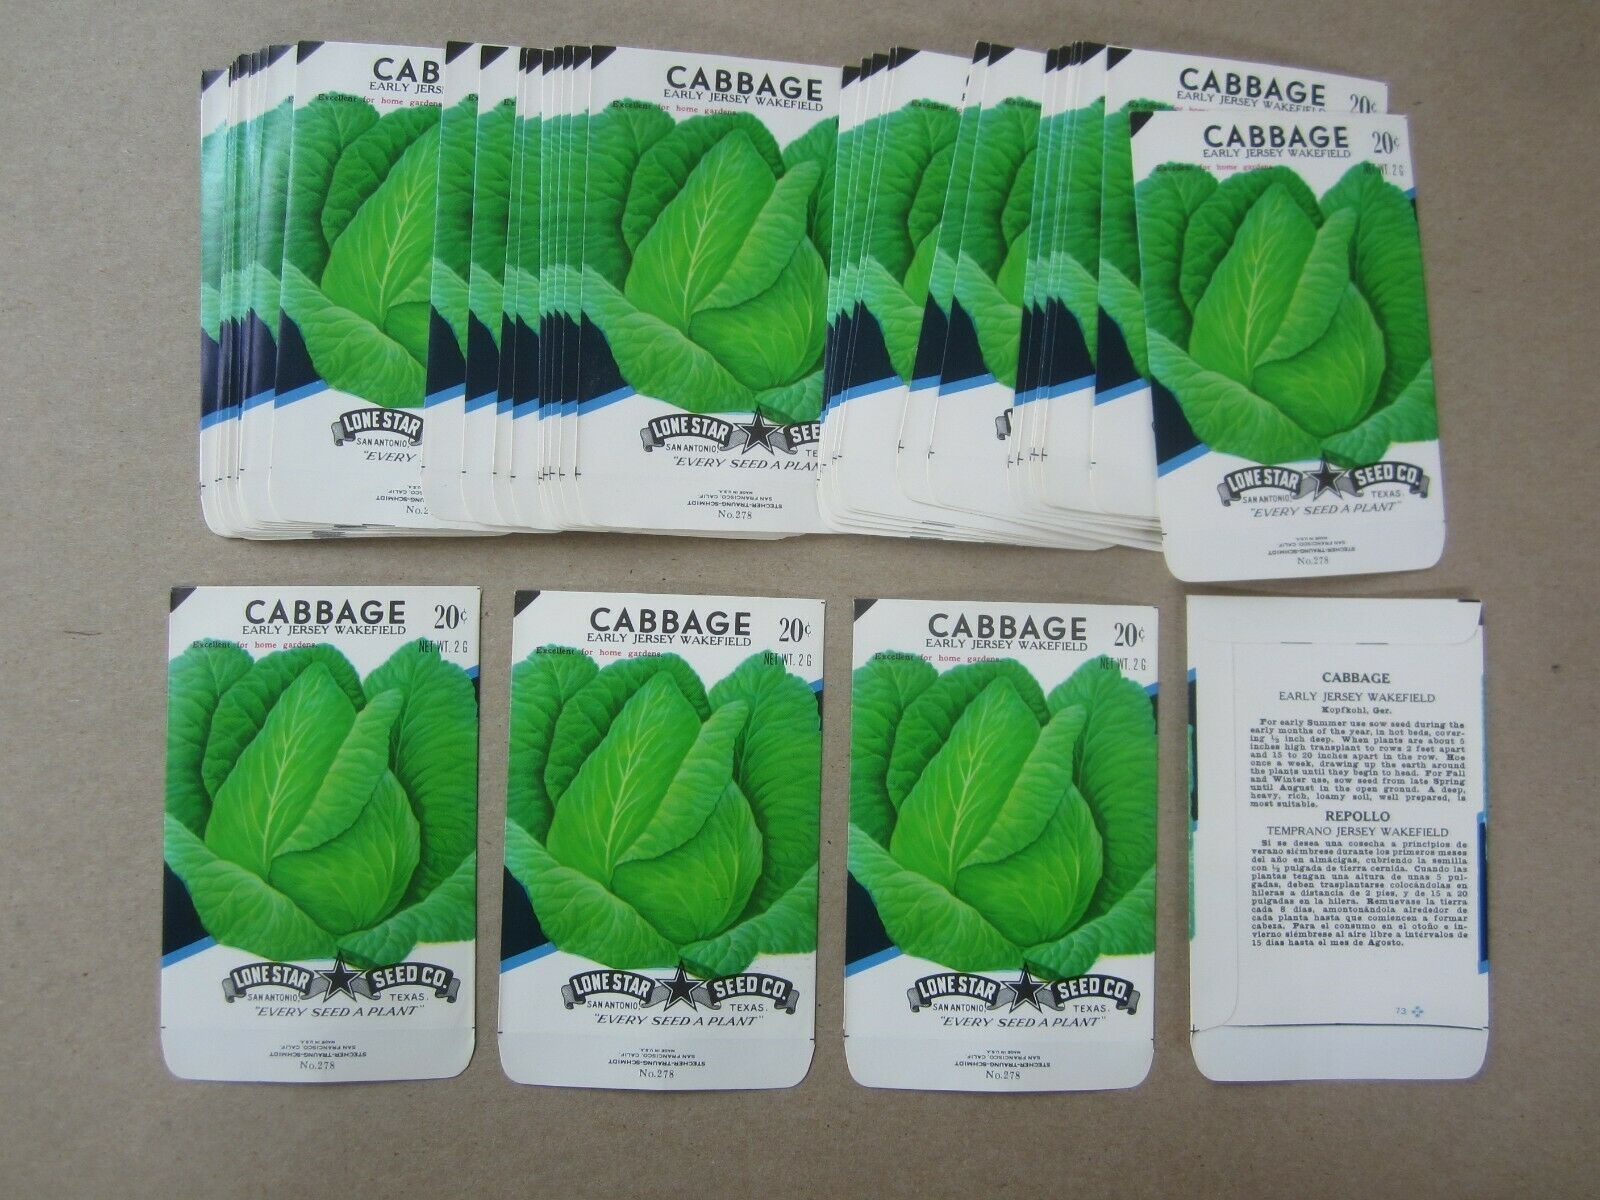  Lot of 50 Old Vintage - CABBAGE Jersey Wakefie...